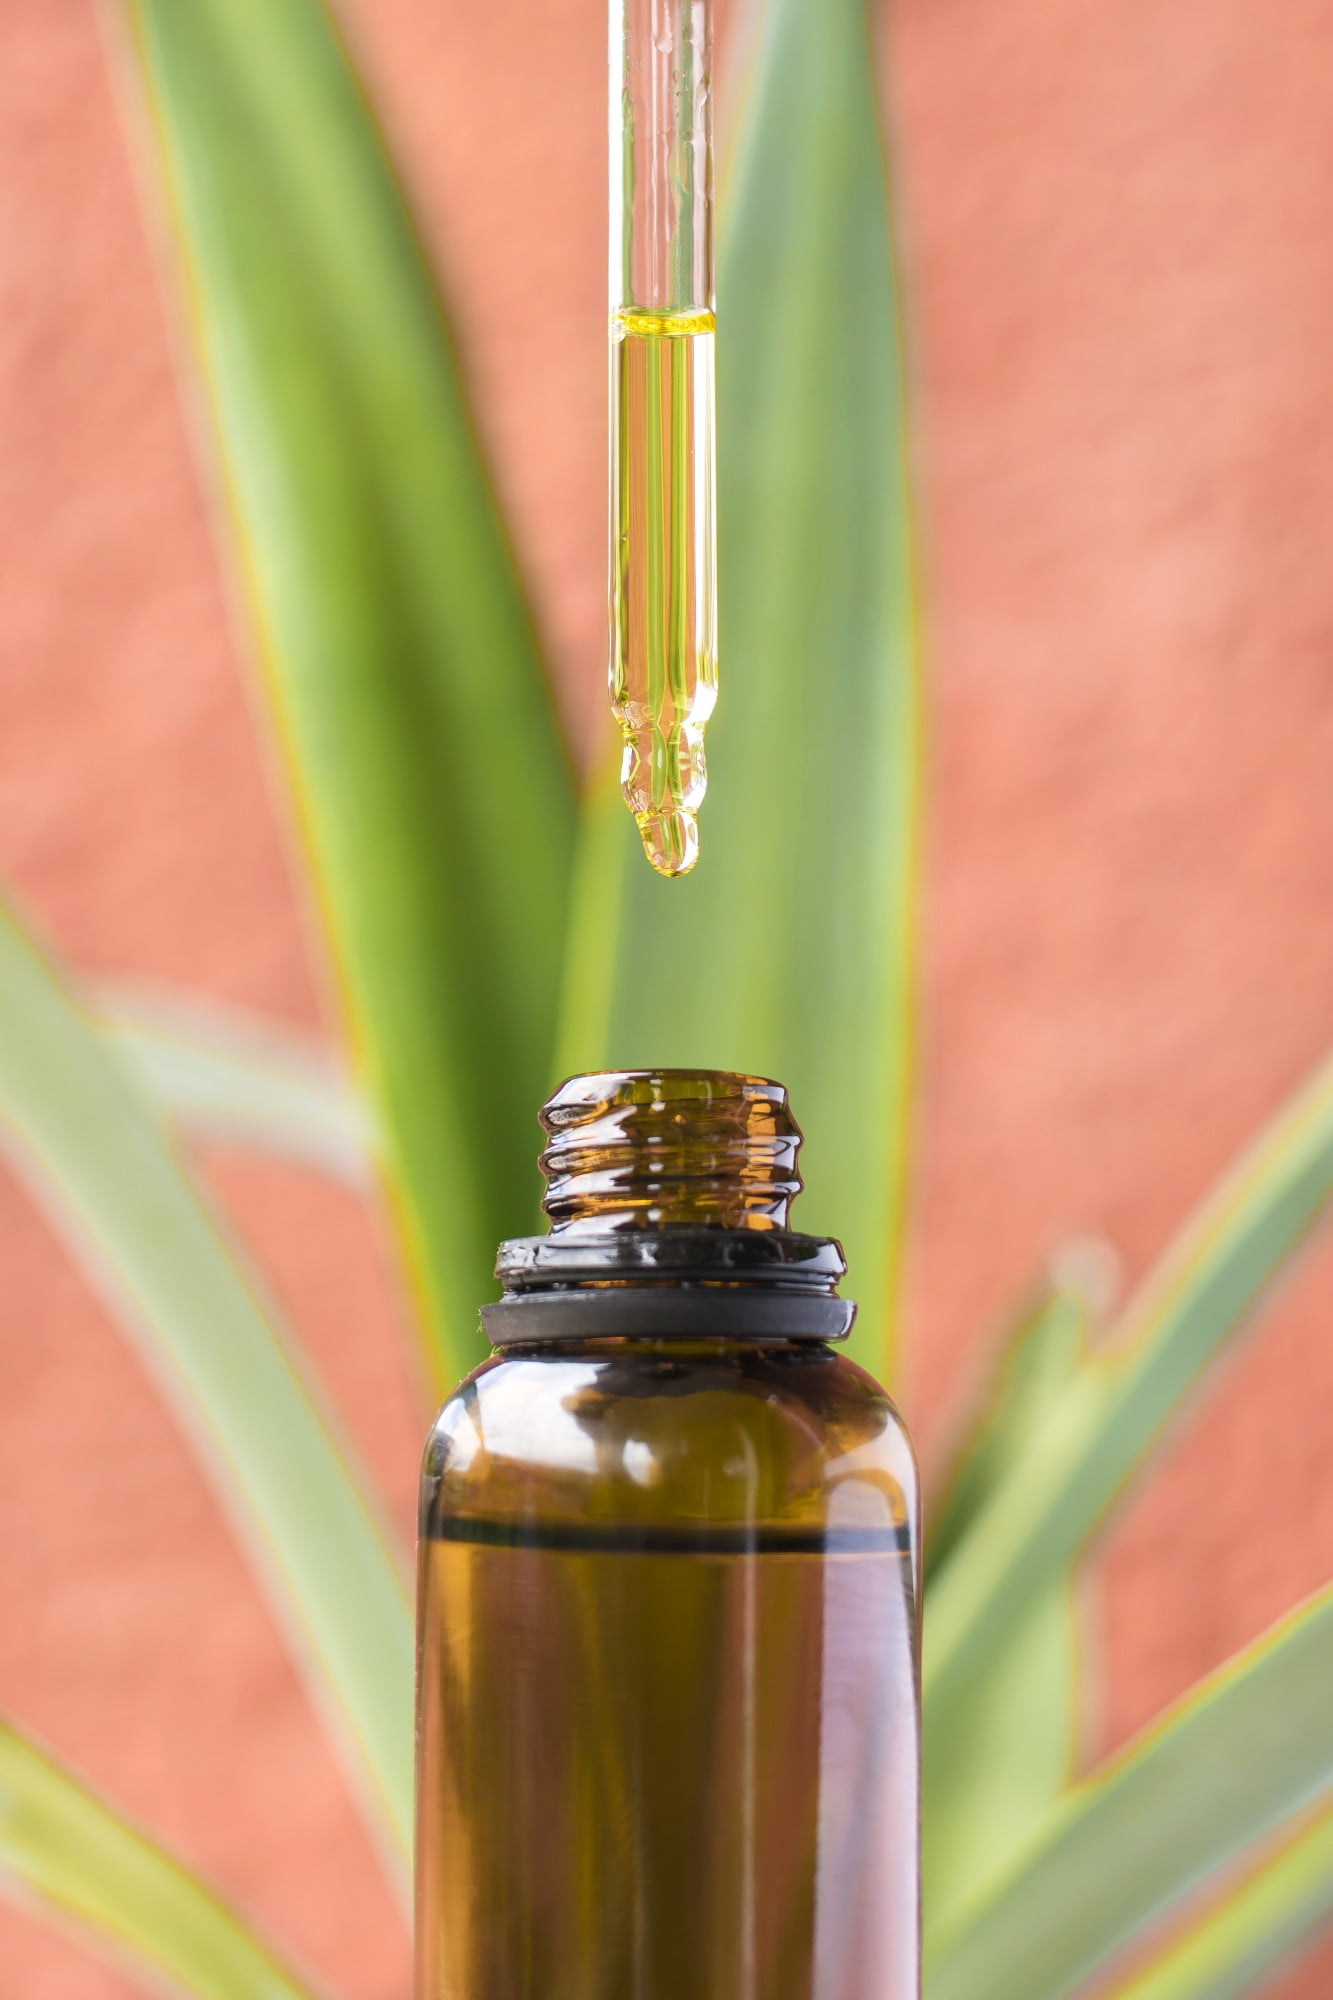 Both liquid forms of CBD that's derived from hemp plants, click here to explore the differences between CBD tincture vs oil.